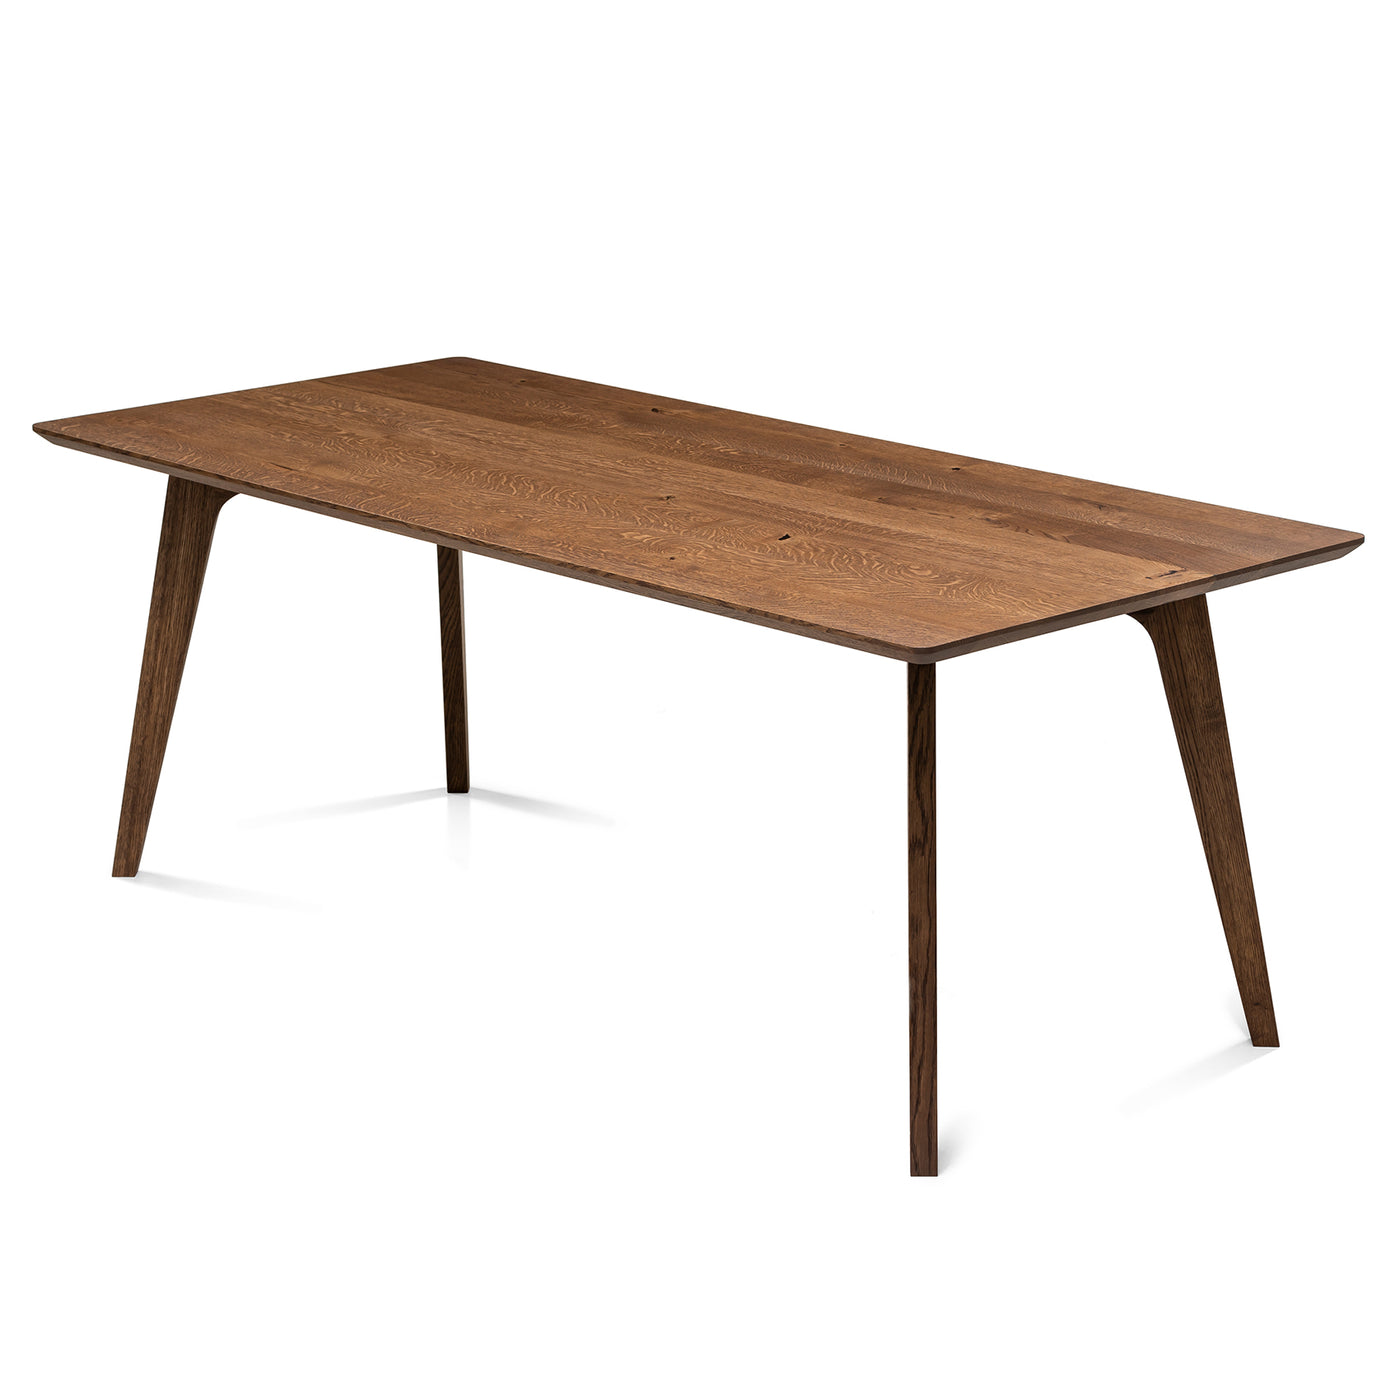 Amber Chocolate Oak Dining Table Extendable - S10Home